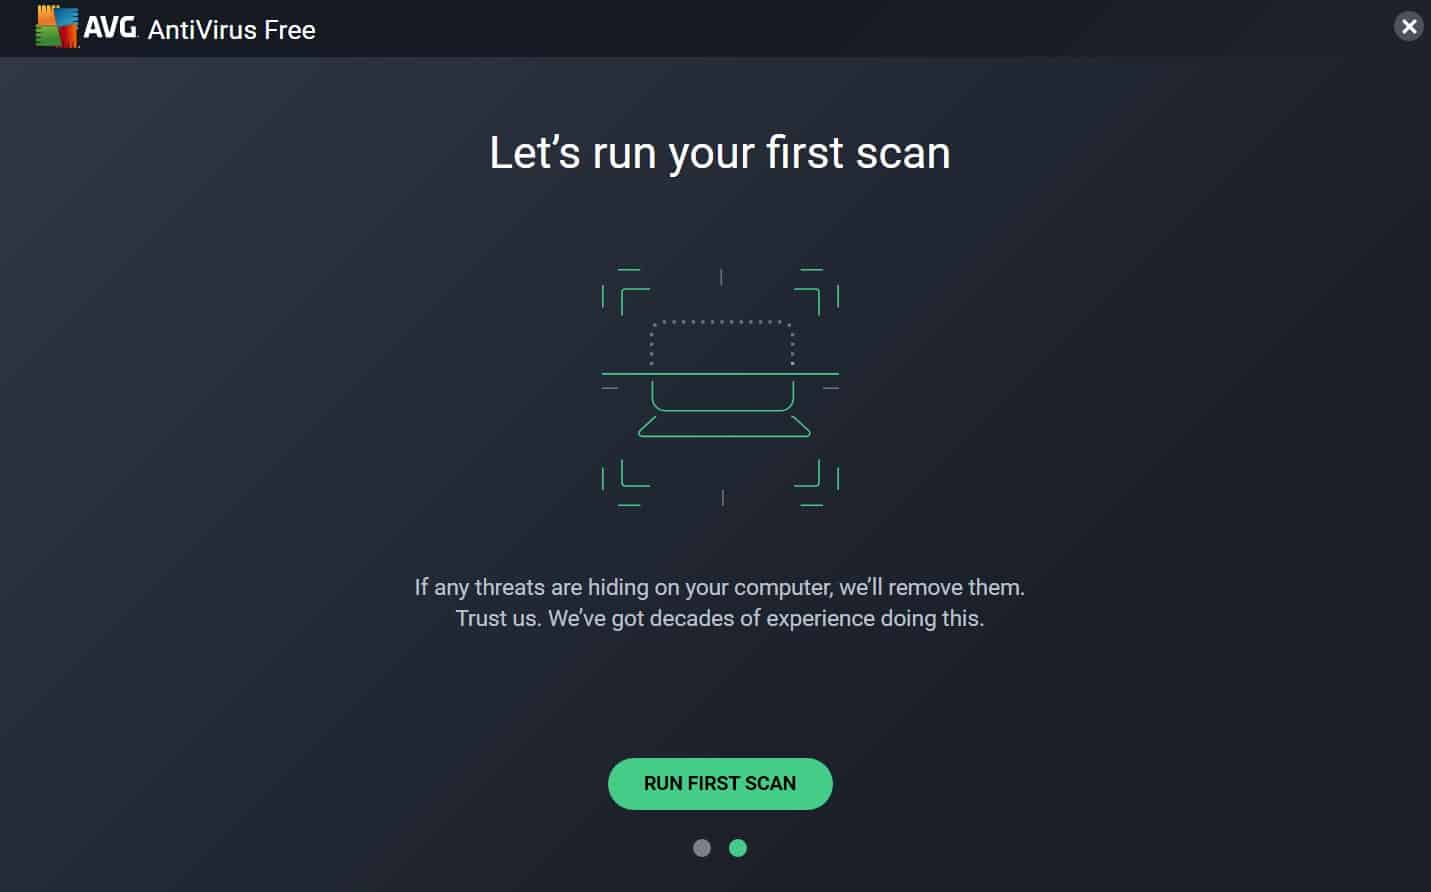 Scan your computer for malware and viruses:
Run a full system scan with your preferred antivirus software.